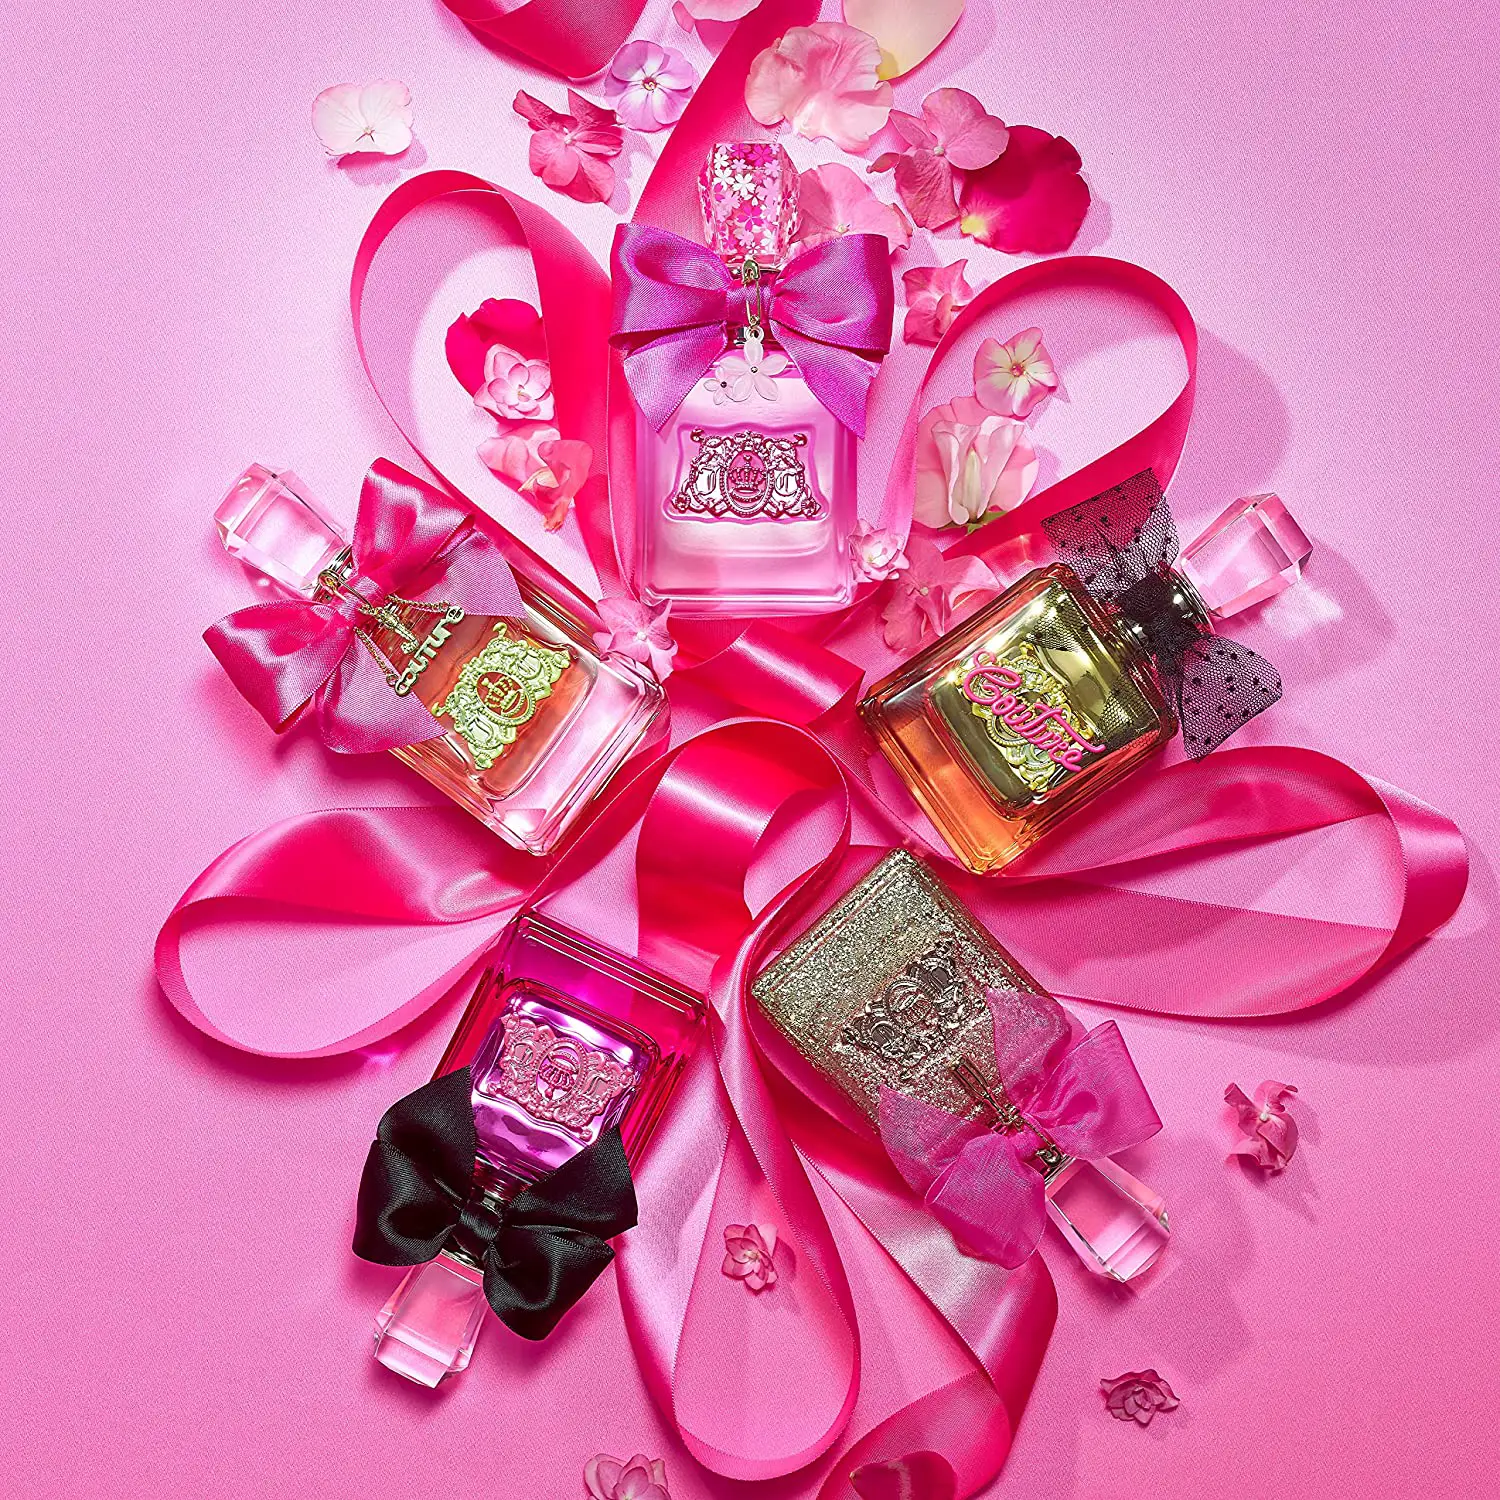 The Ultimate Guide To The Juicy Couture Viva La Juicy Perfumes